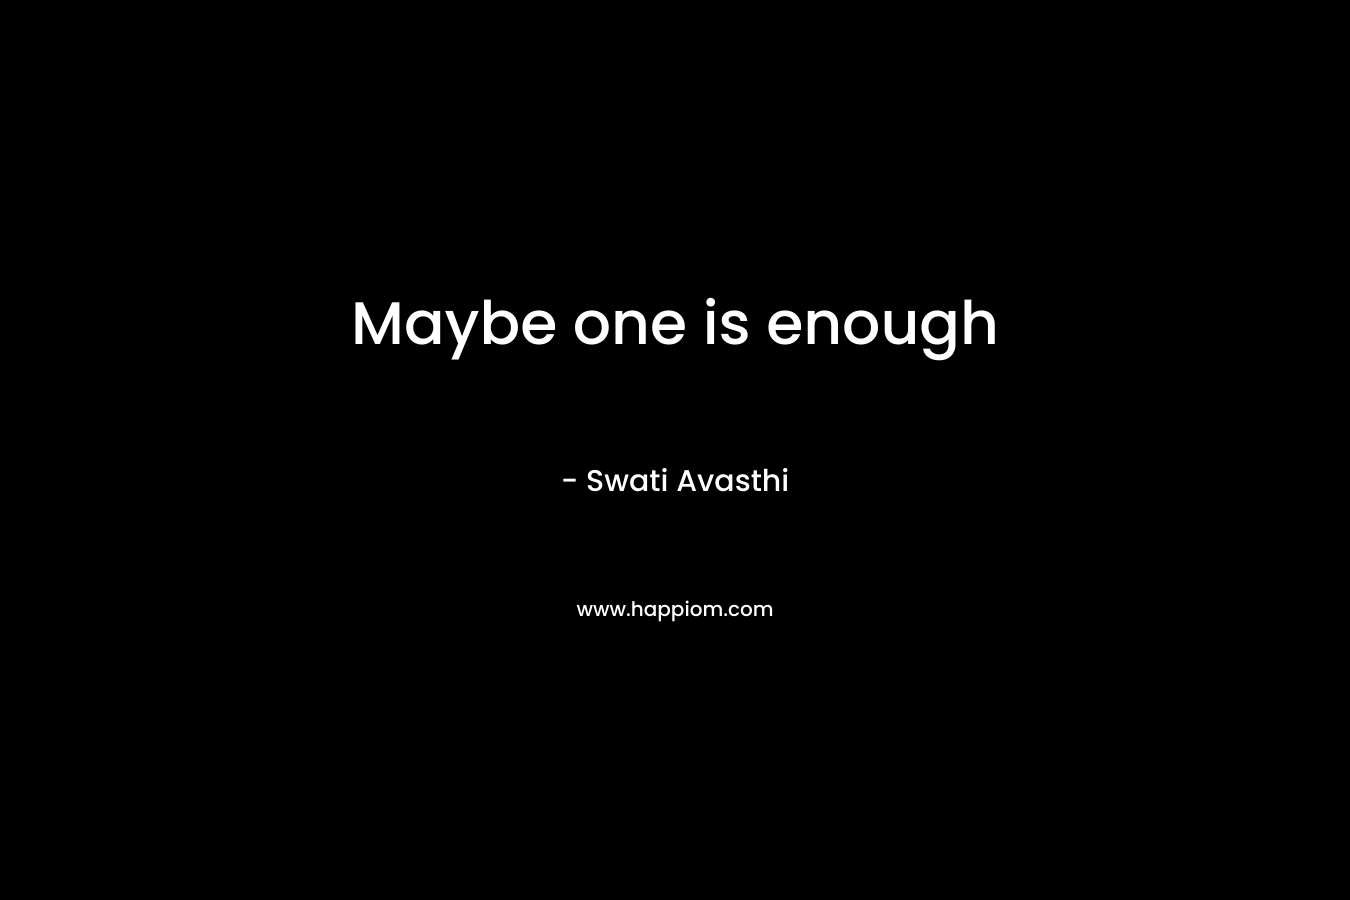 Maybe one is enough – Swati Avasthi